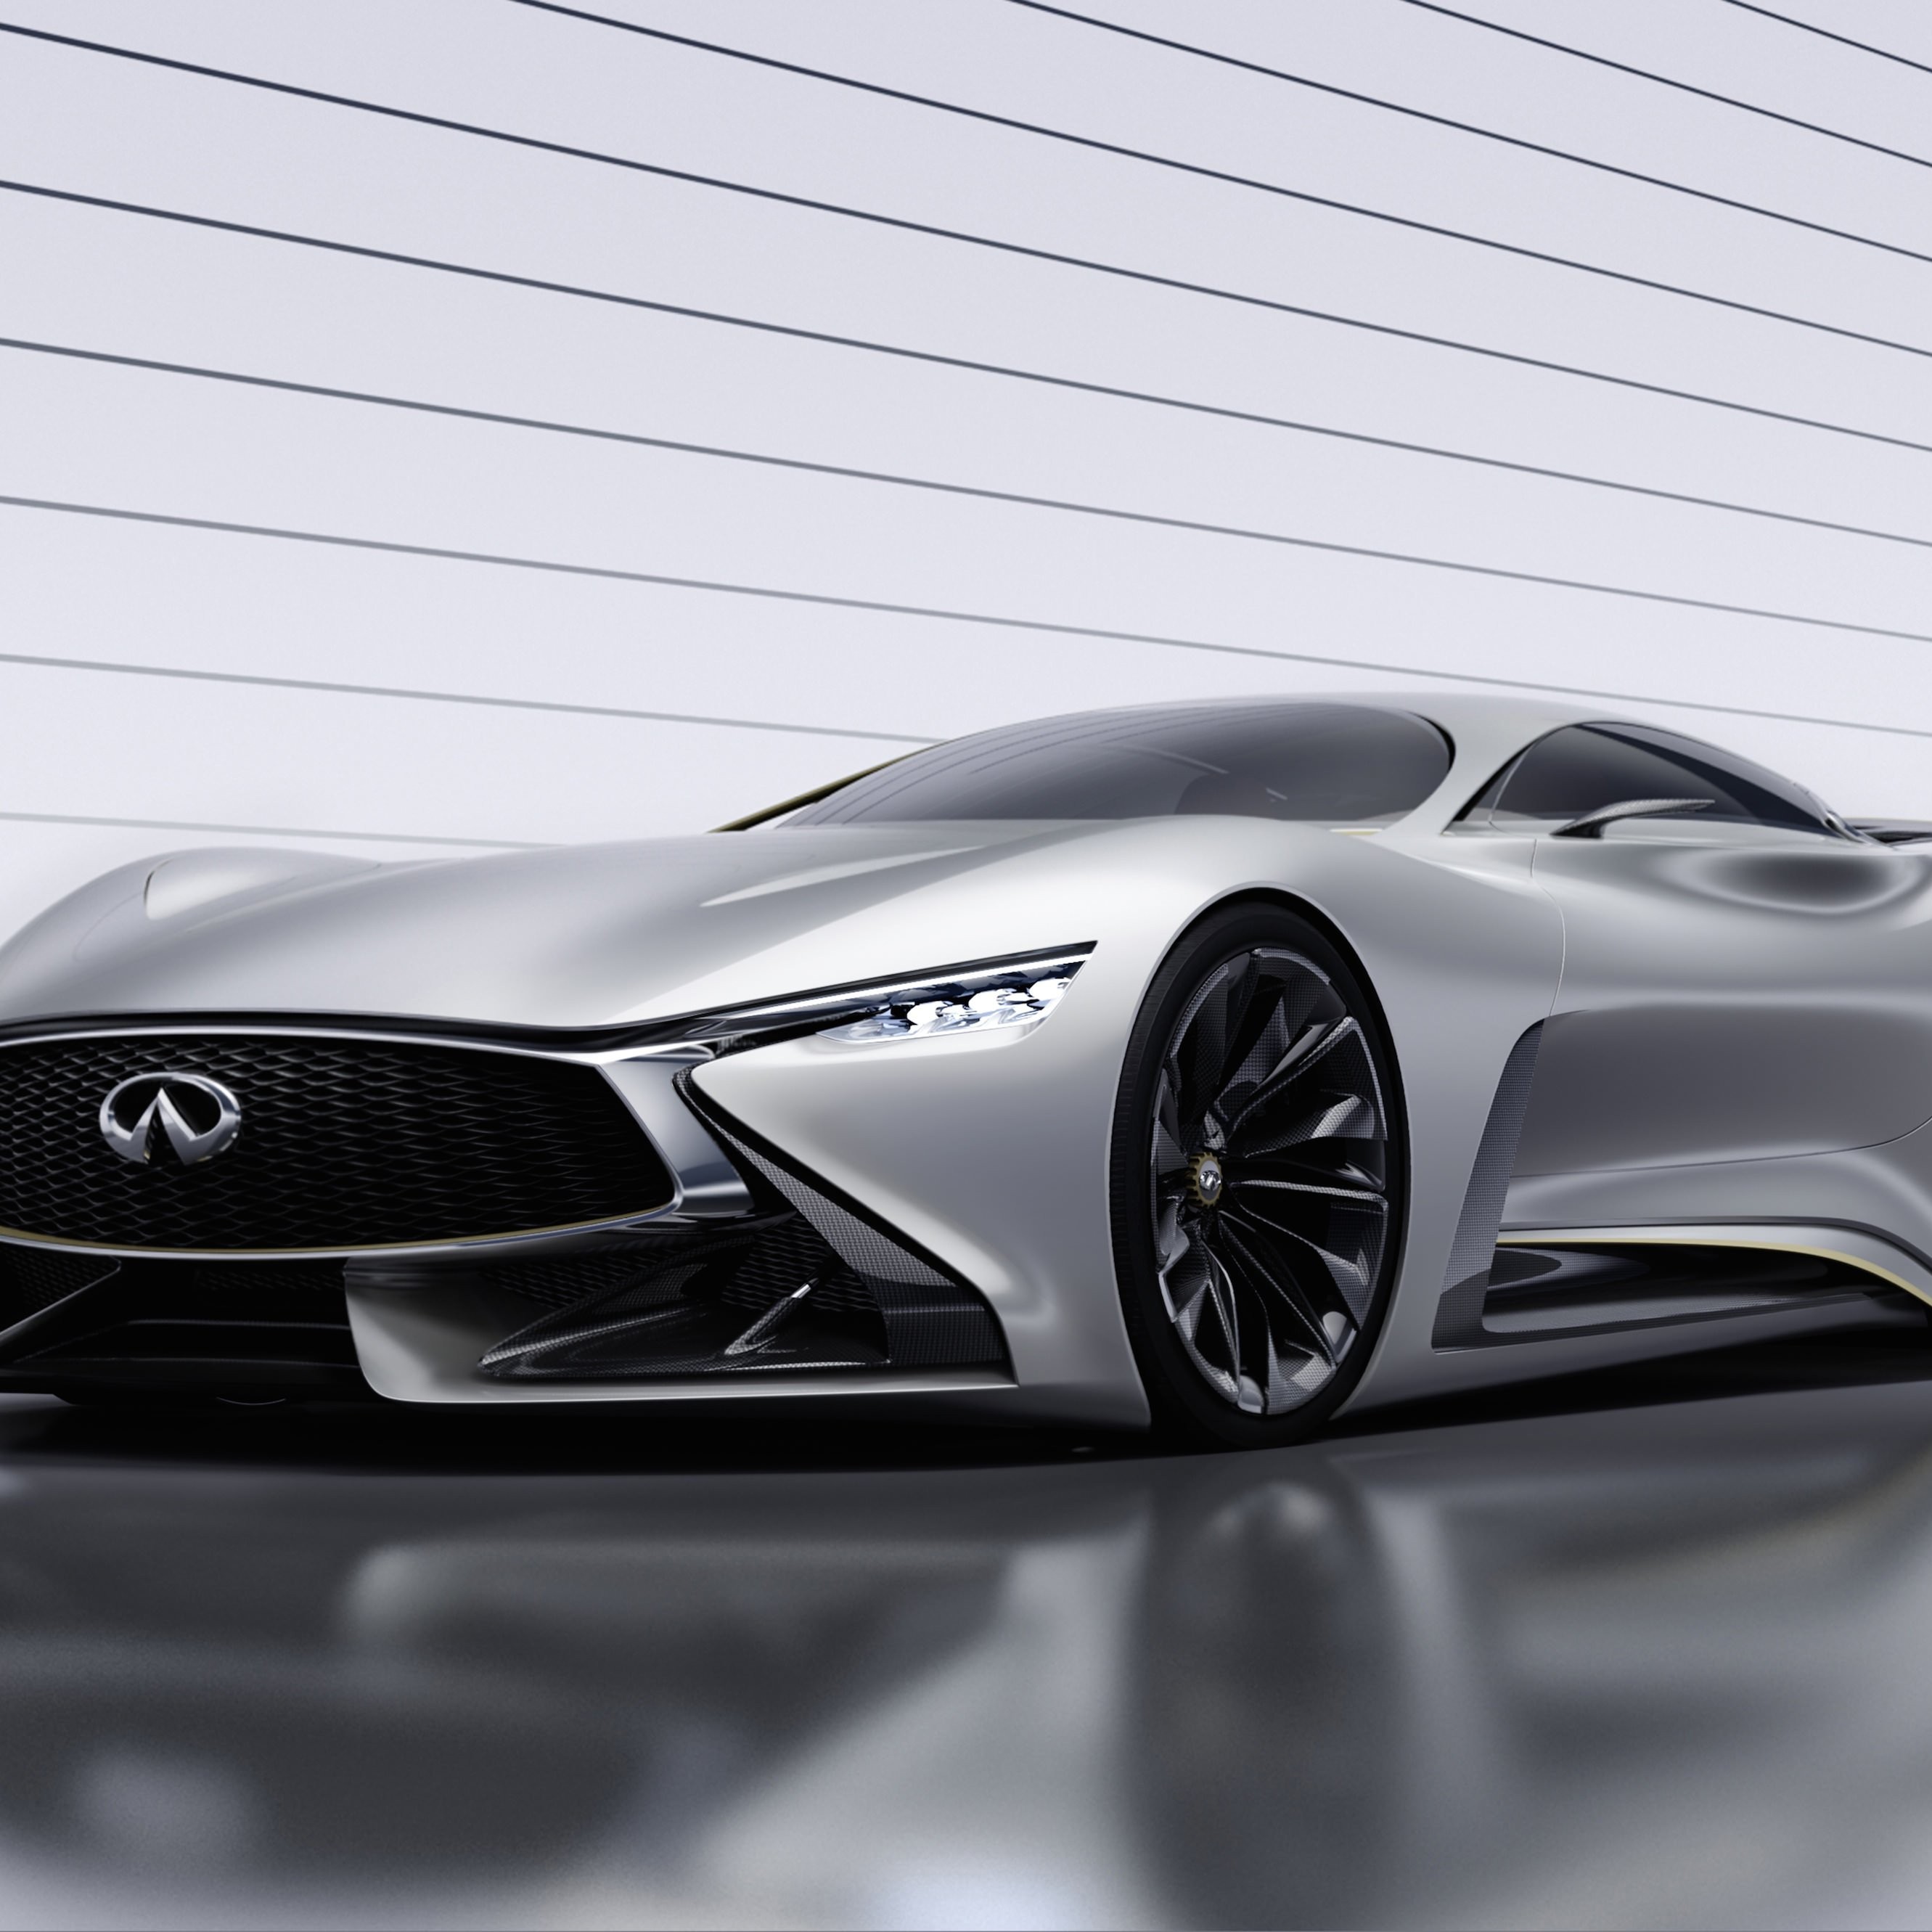 Infiniti Vision GT Concept Wallpaper for Apple iPhone 6 Plus